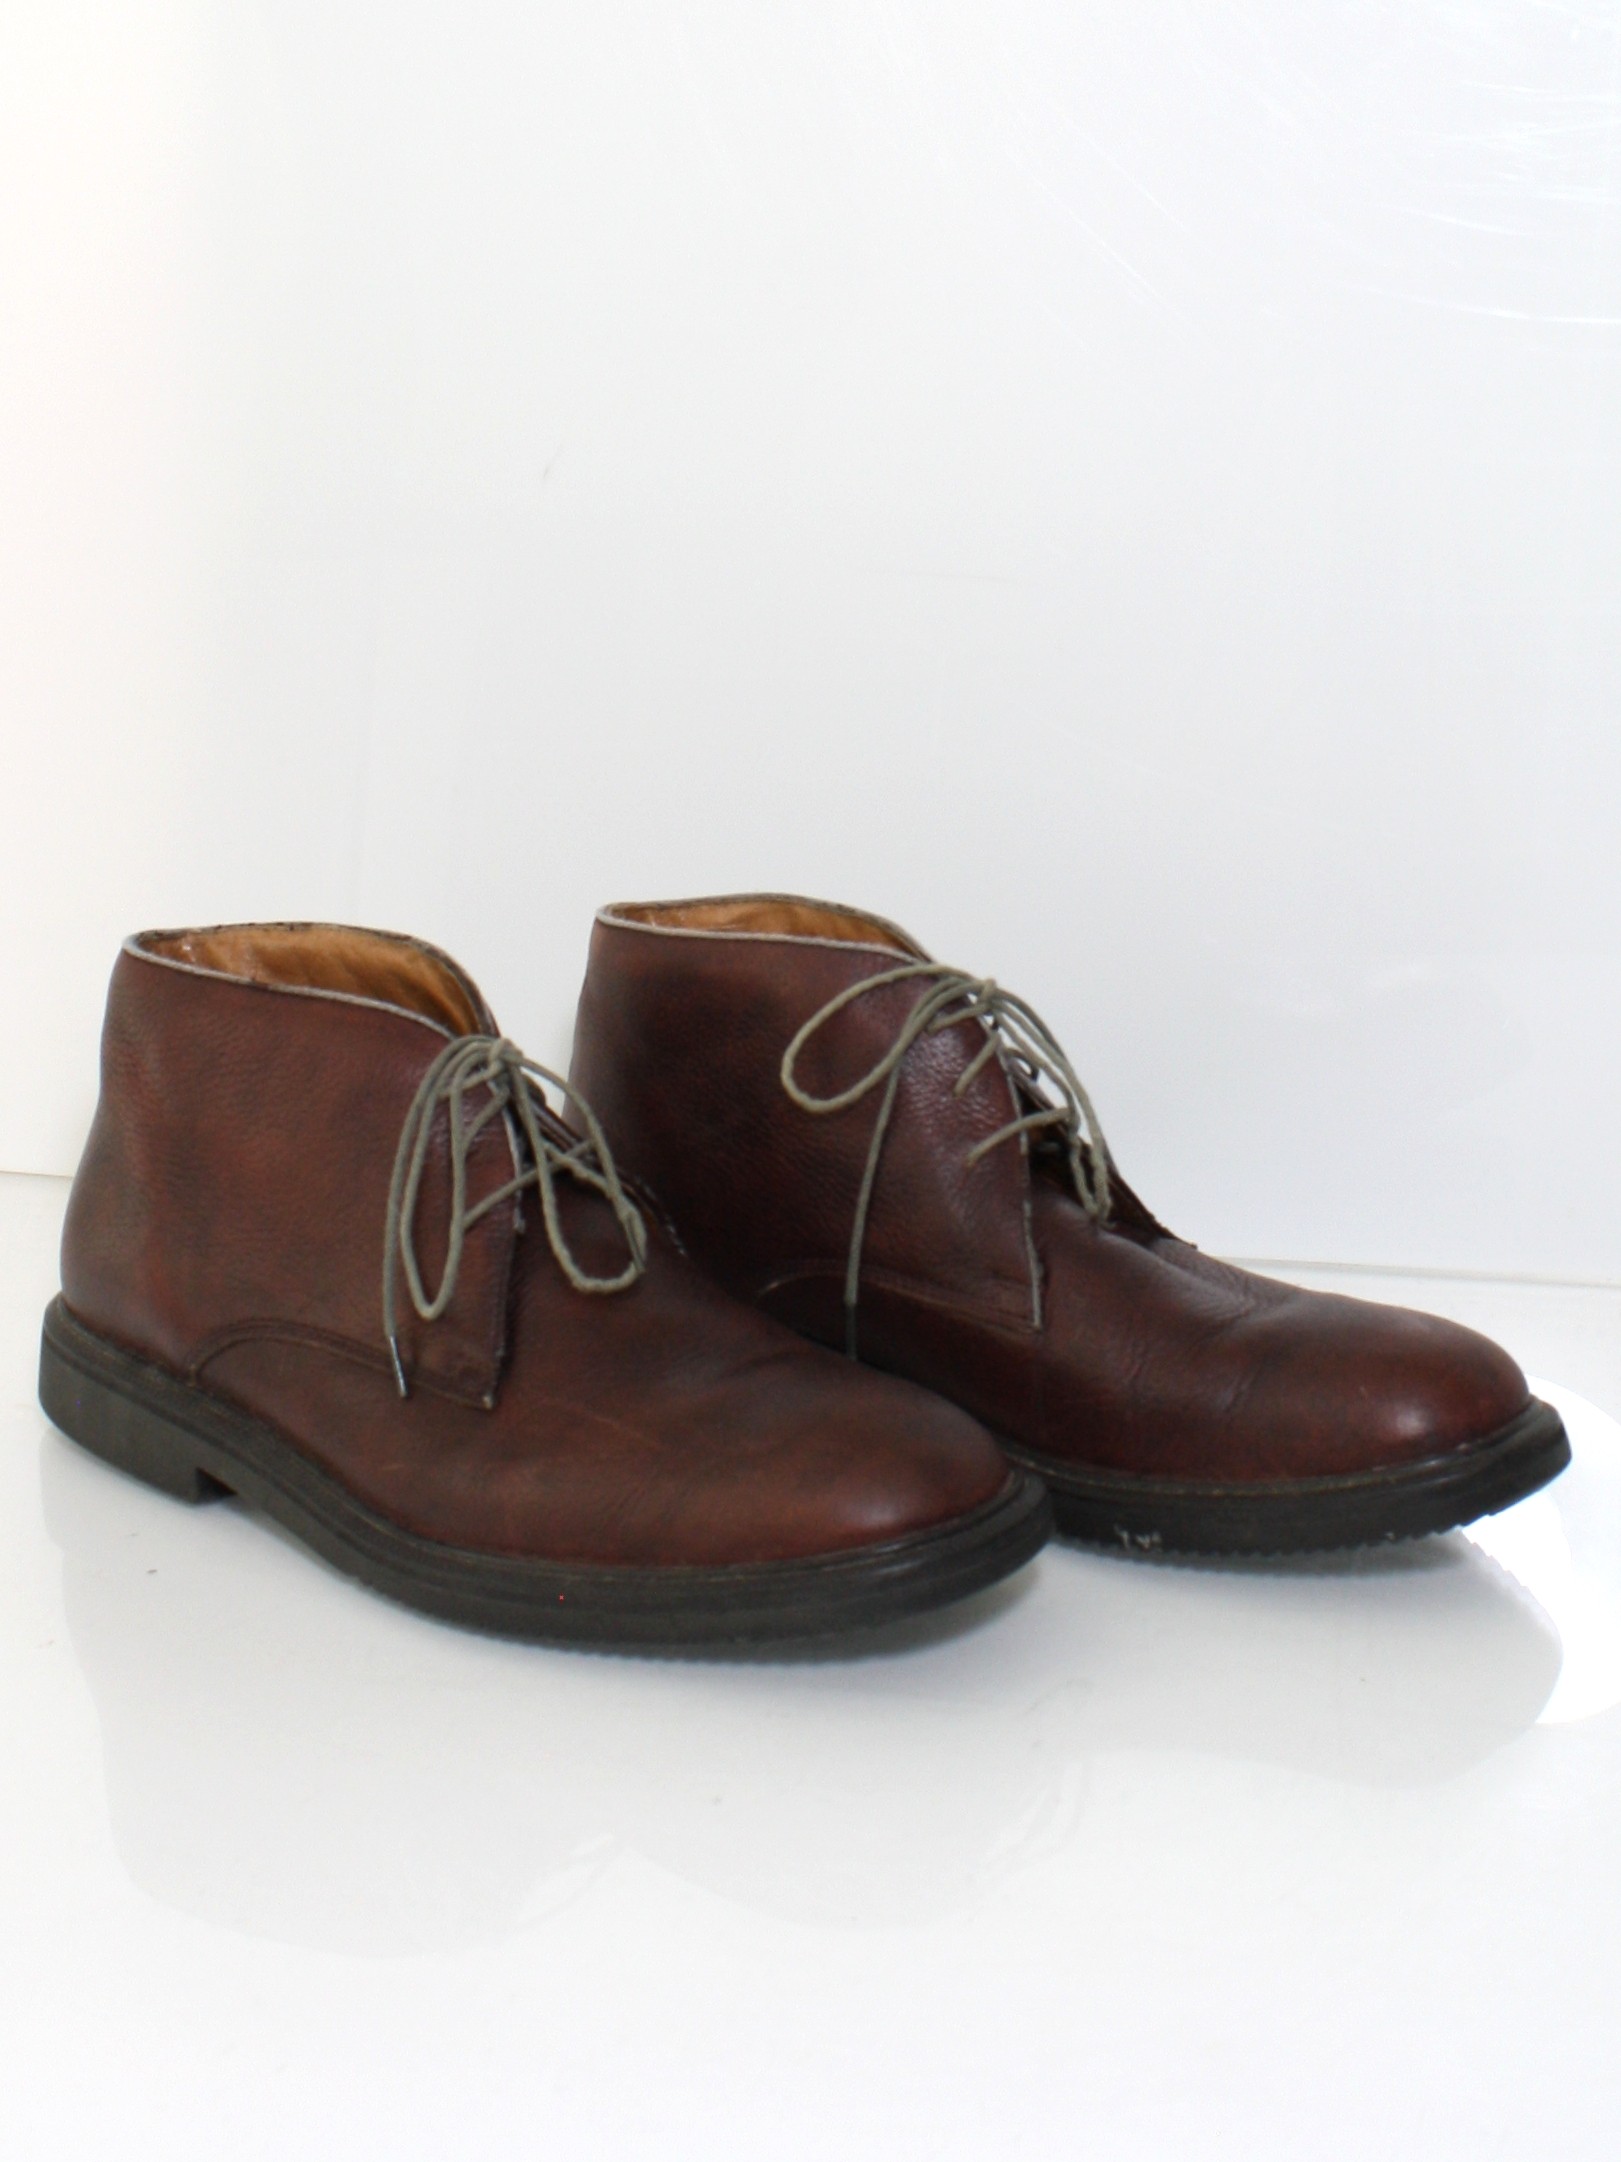 1990's Retro Shoes: 90s -Hush Puppies- Mens brown leather three grommet ...